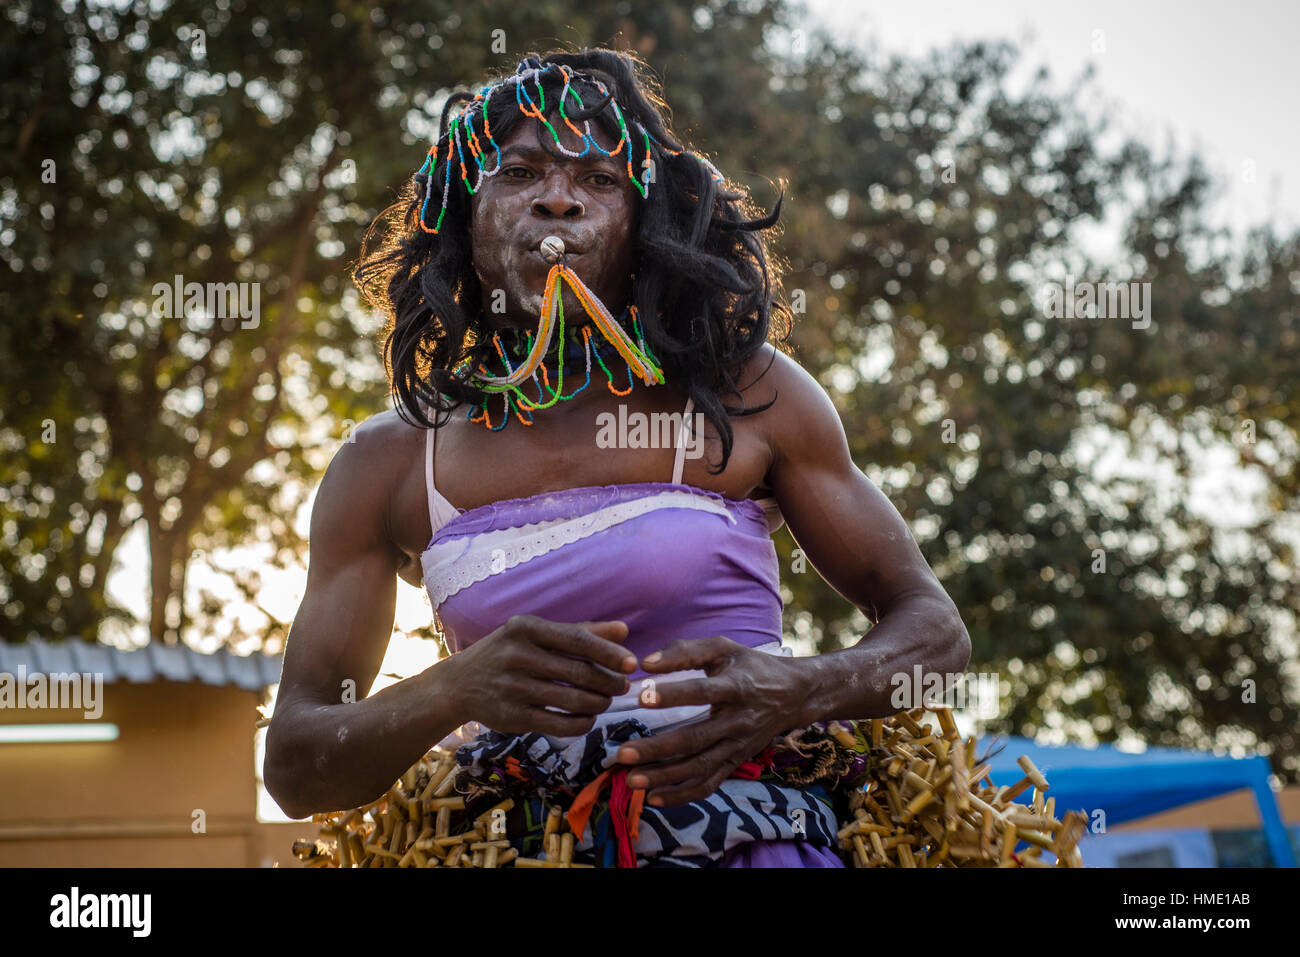 Performing of traditional dance at Zambia International Trade Fair in Ndola, Zambia Stock Photo